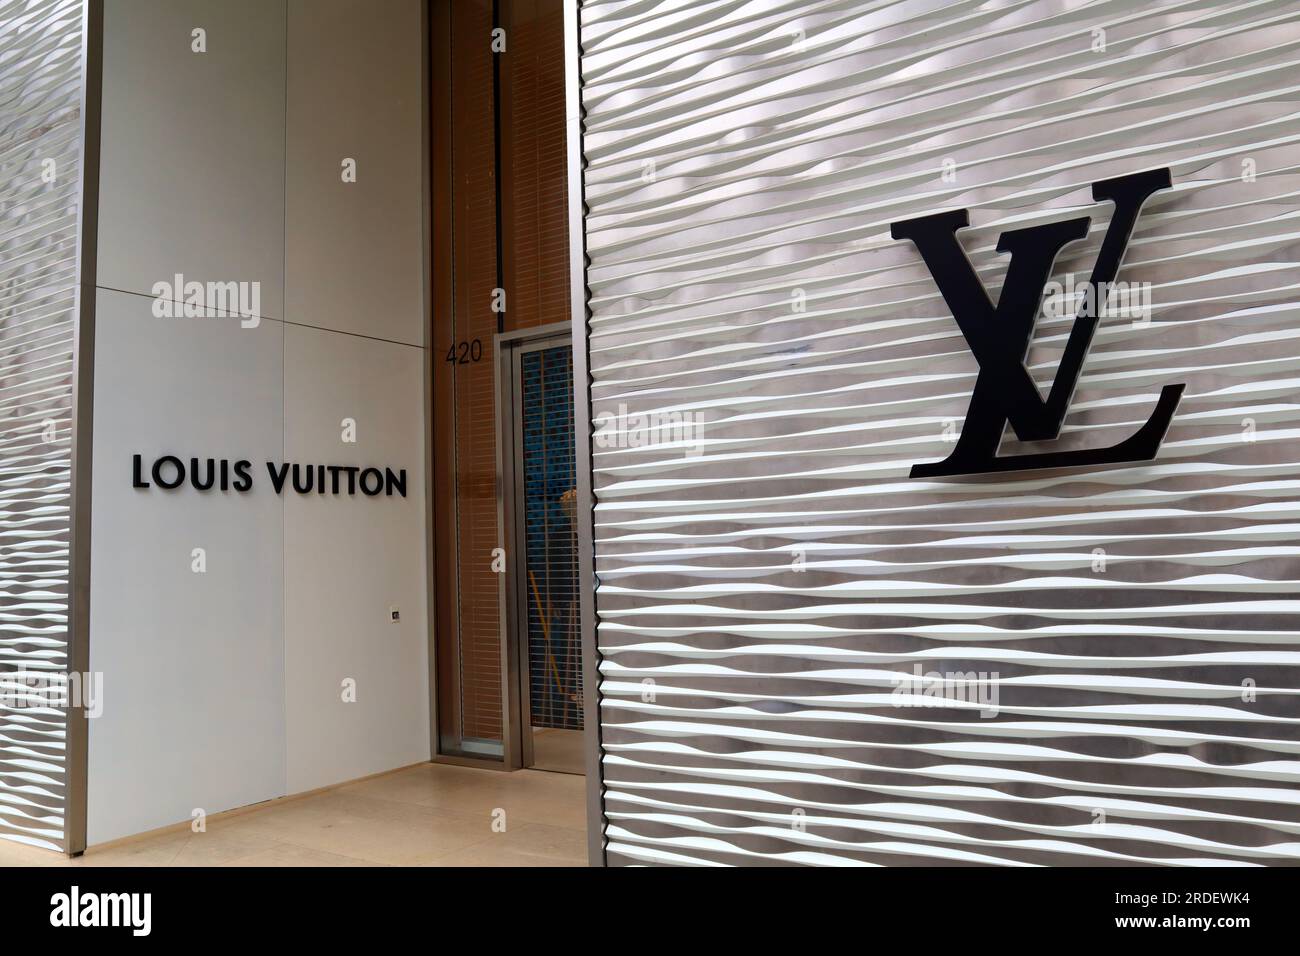 Louis Vuitton Logo Sign Panel on Shop. Louis Vuitton is a Famous High End  Fashion House Manufacturer and Luxury Retail Company Fro Editorial Photo -  Image of logo, mall: 119944406